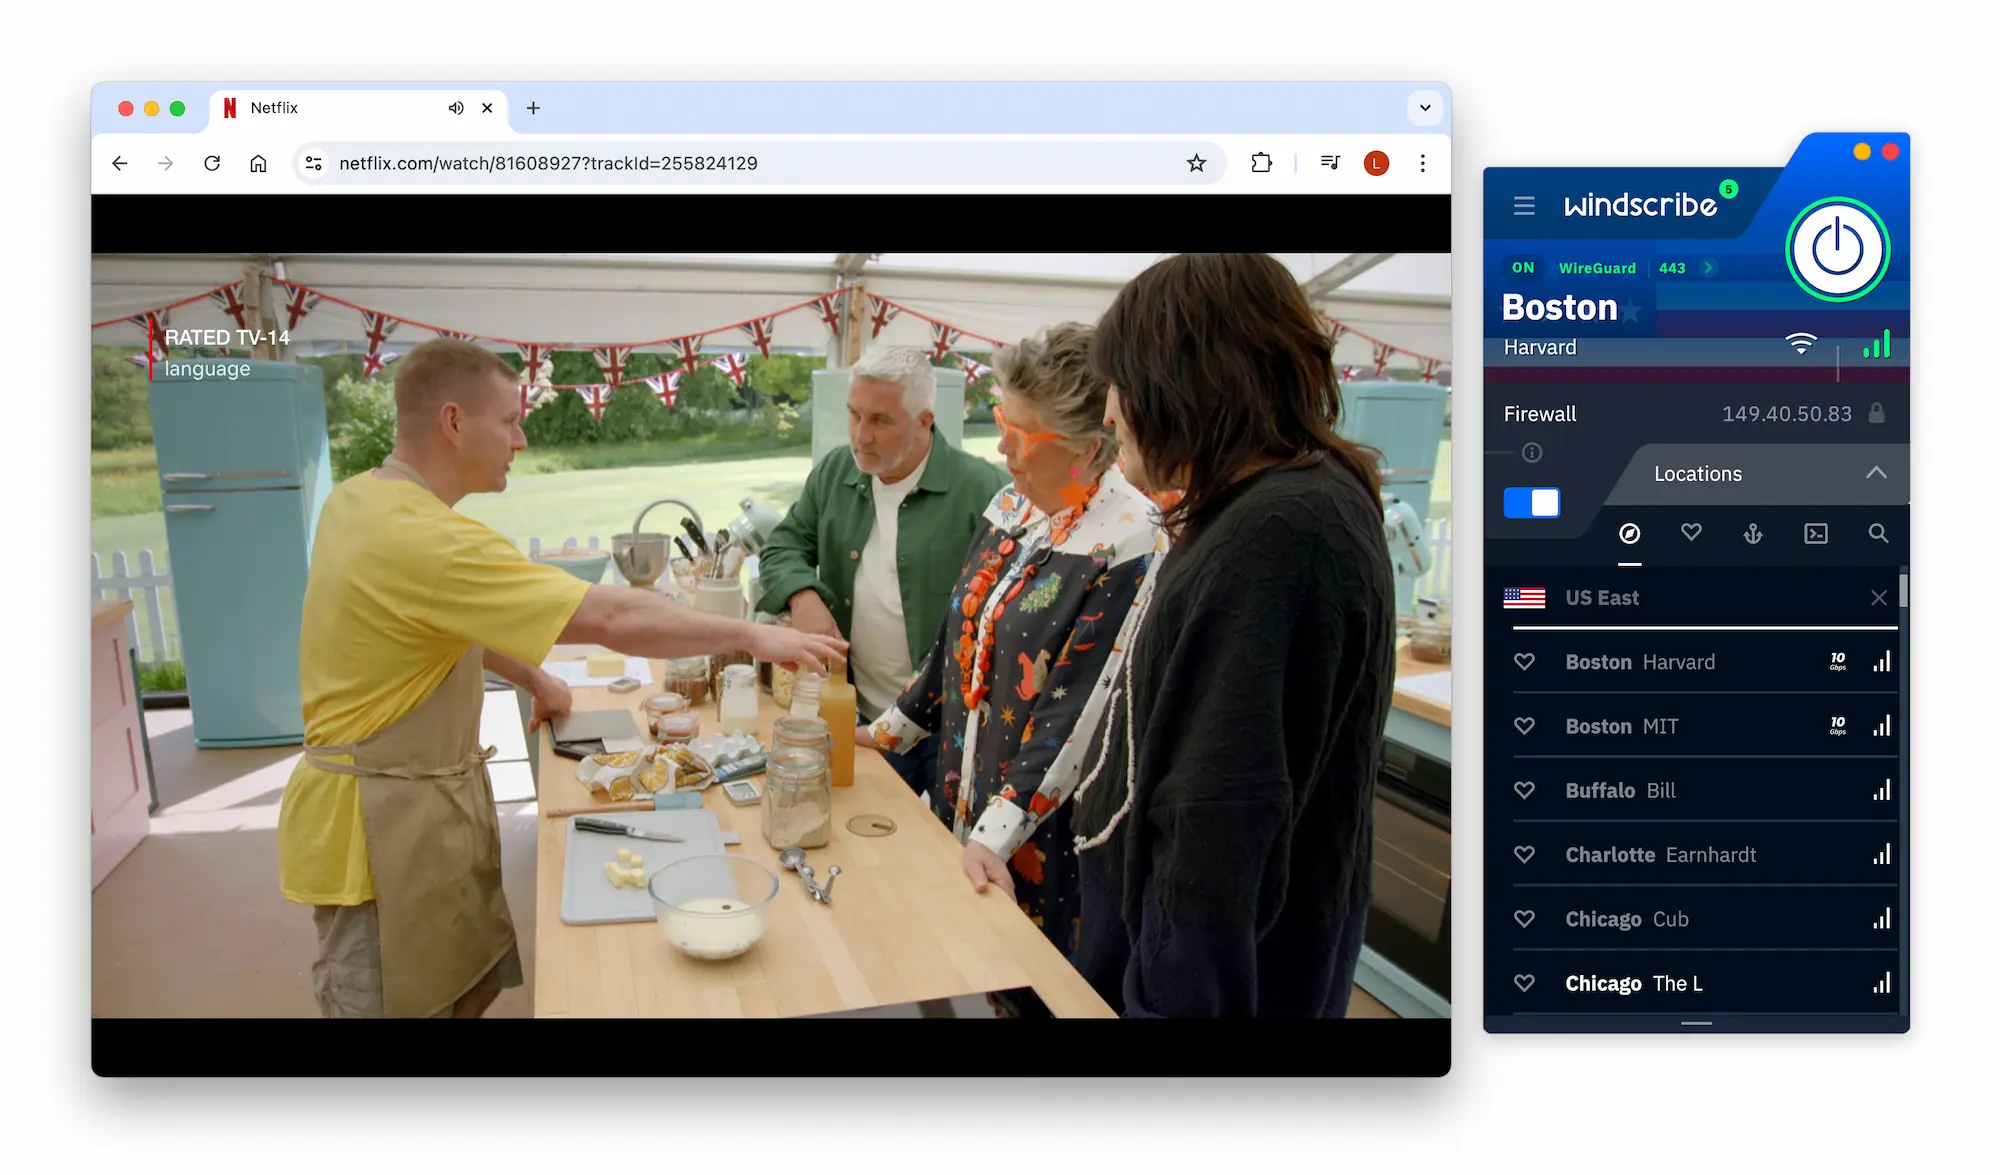 Watching GBBO, which is a US Netflix exclusive, while connected to Windscribe's Boston server.